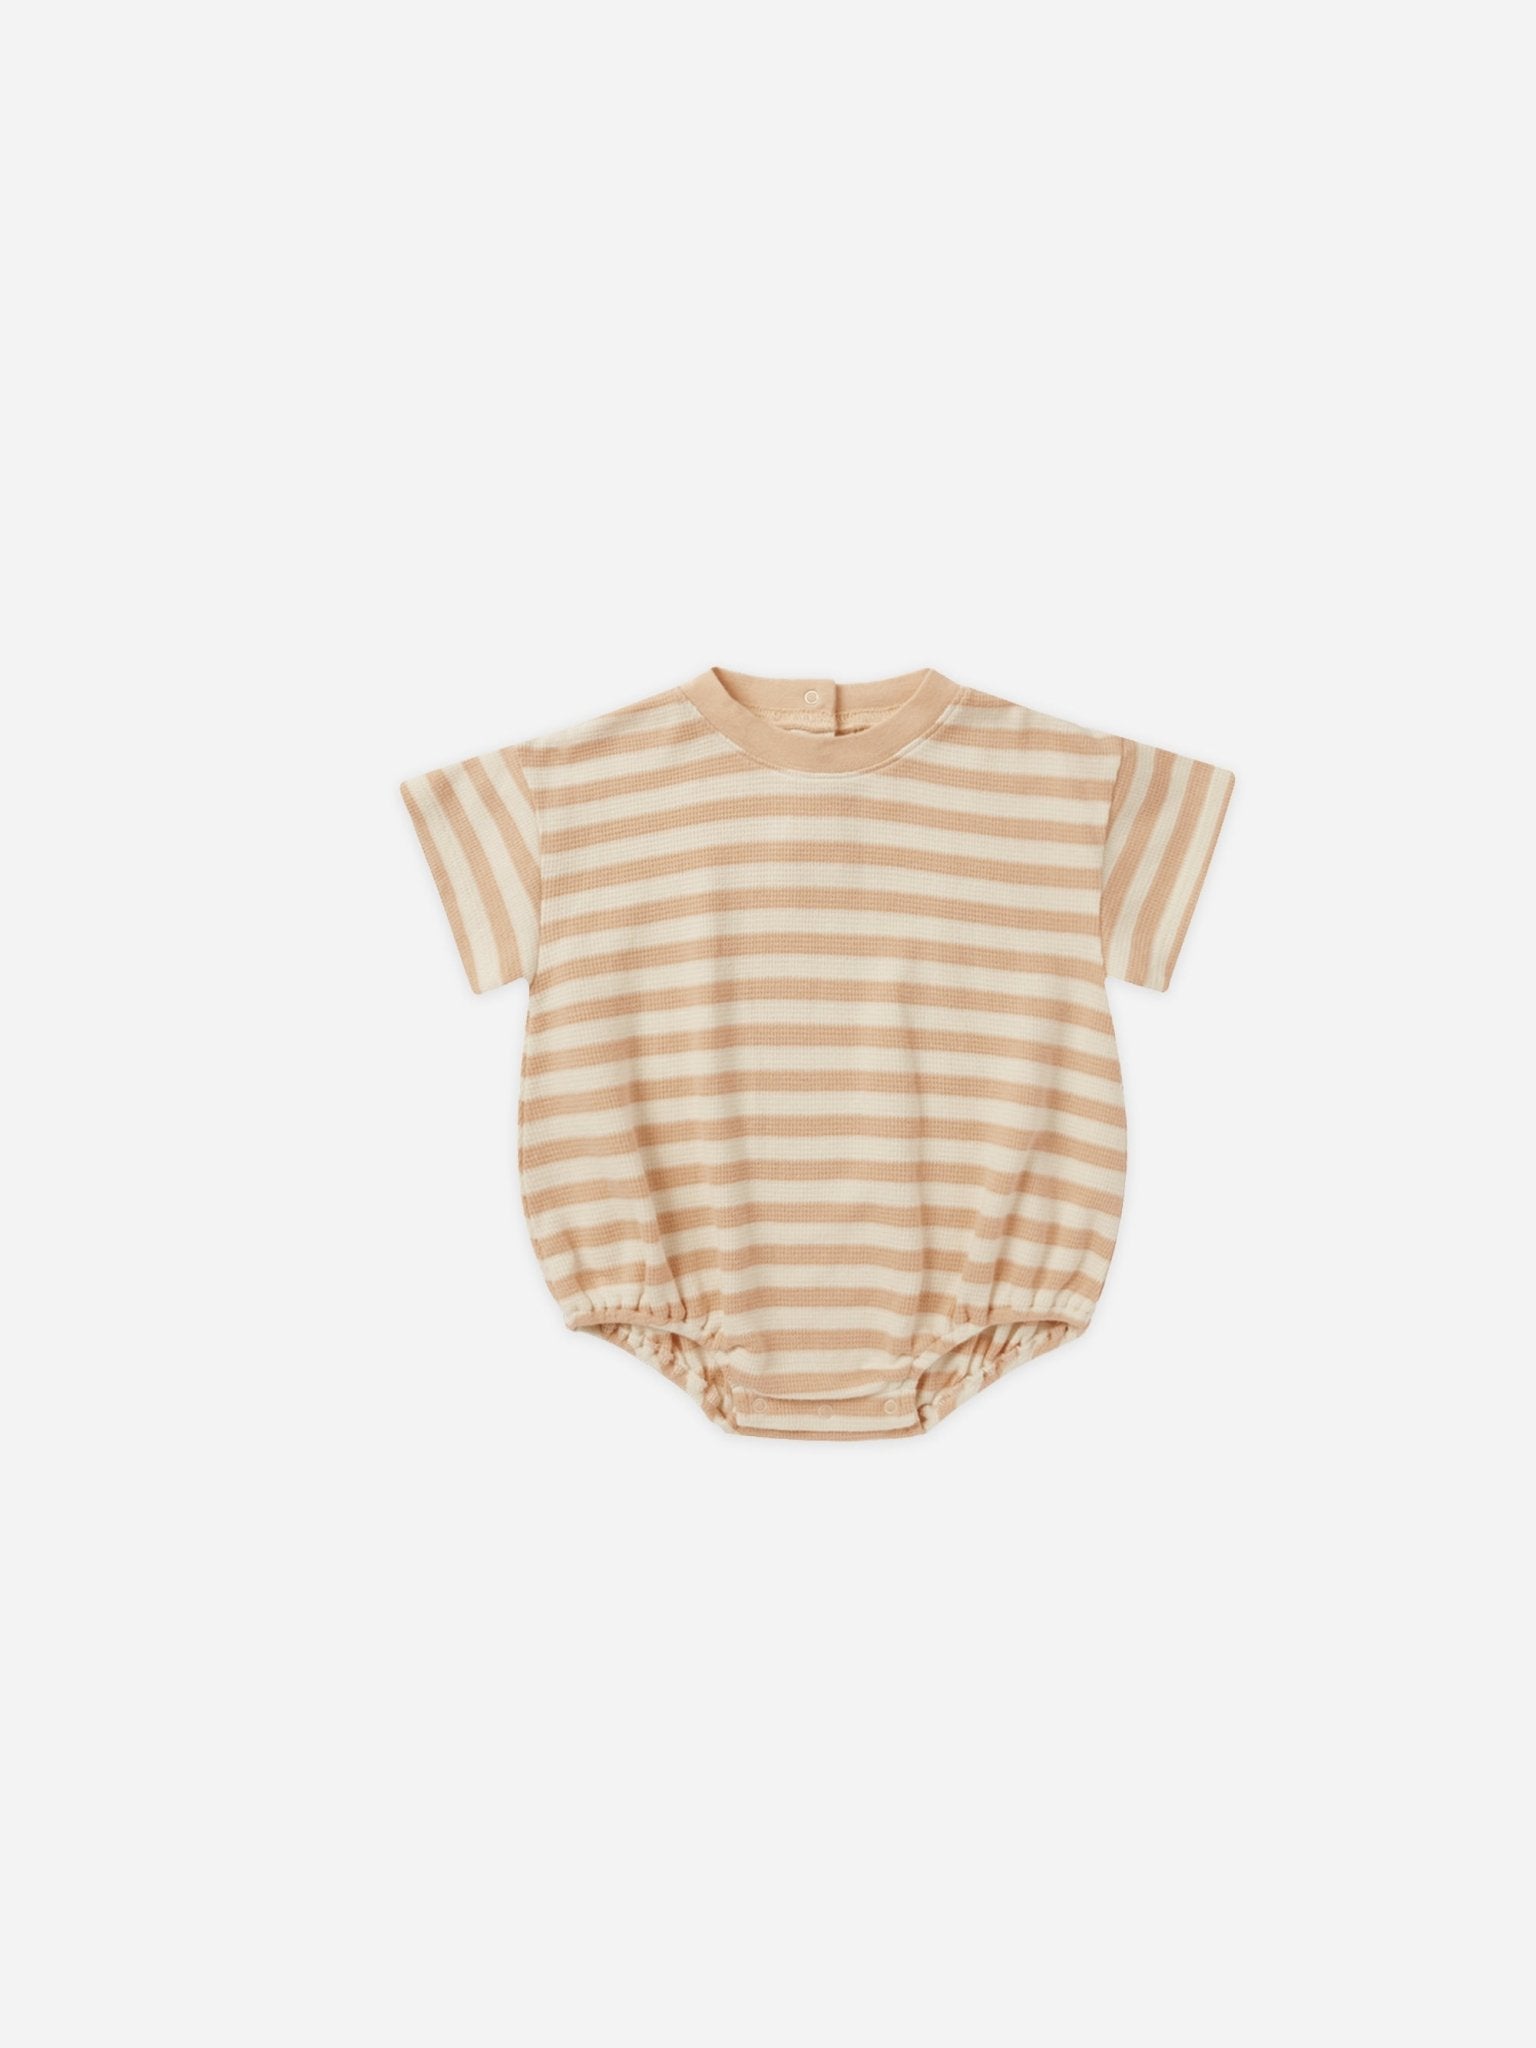 Relaxed Bubble Romper || Apricot Stripe - Rylee + Cru Canada